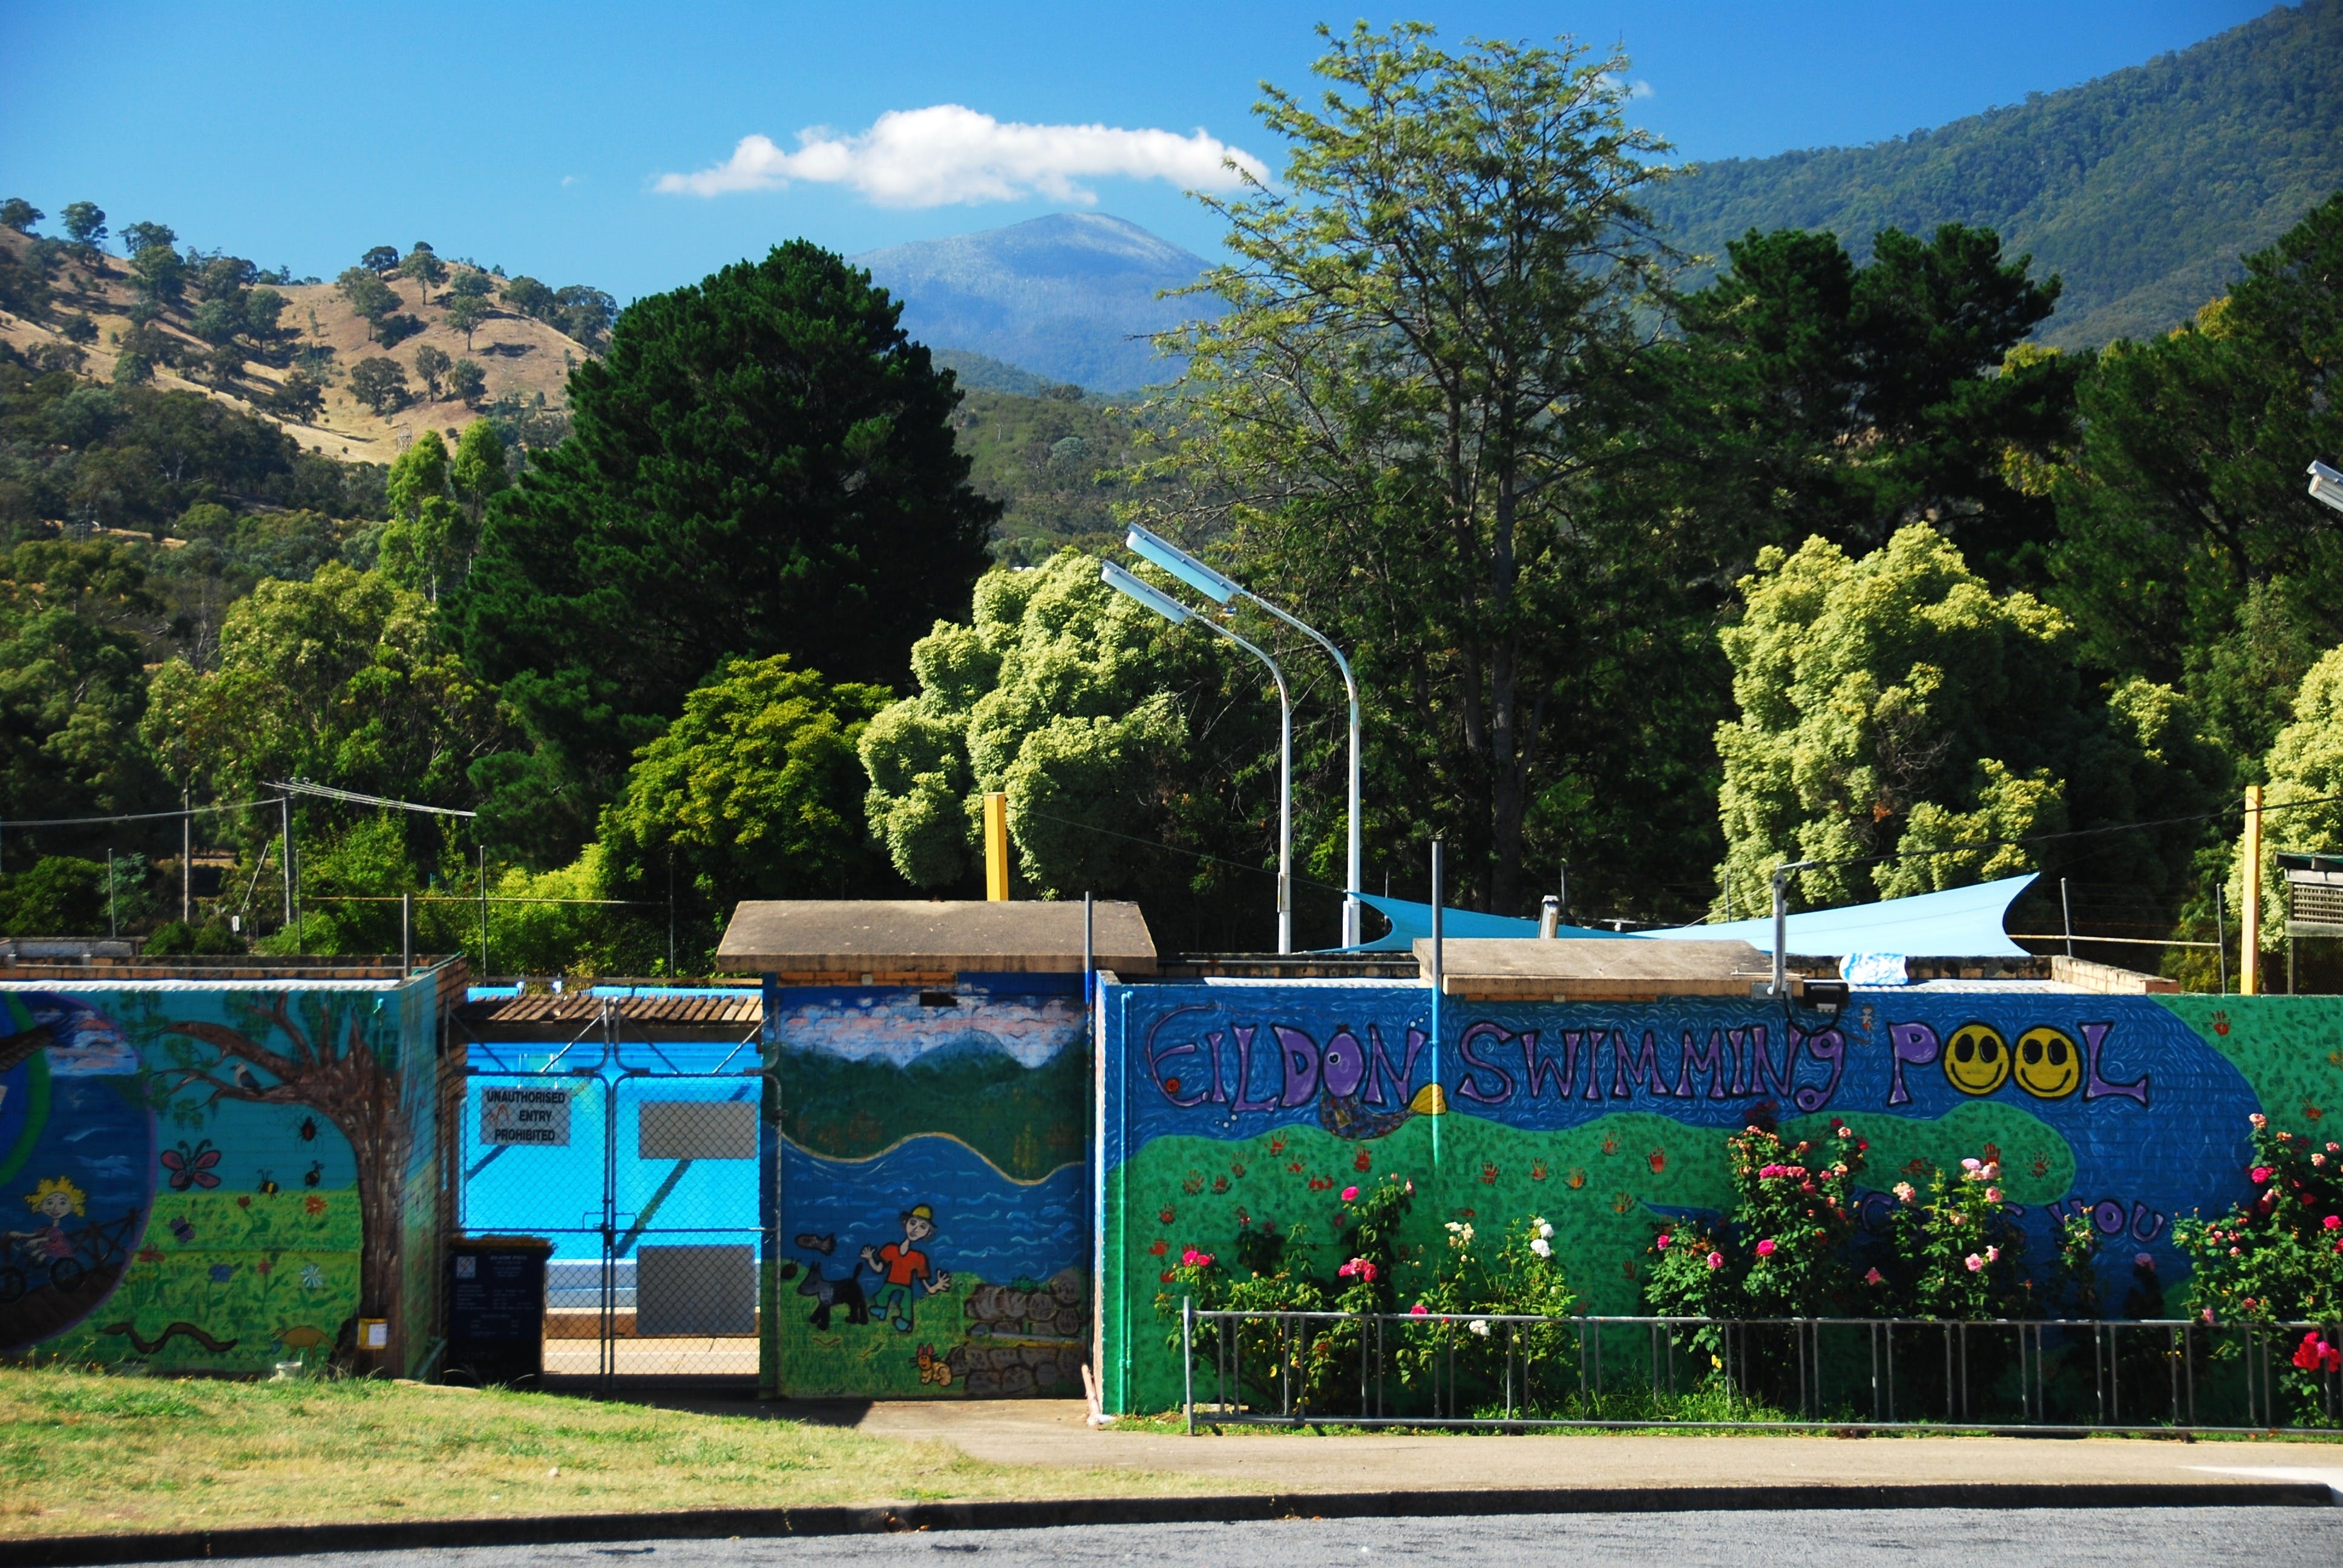 Eildon Outdoor Swimming Pool - Find Attractions